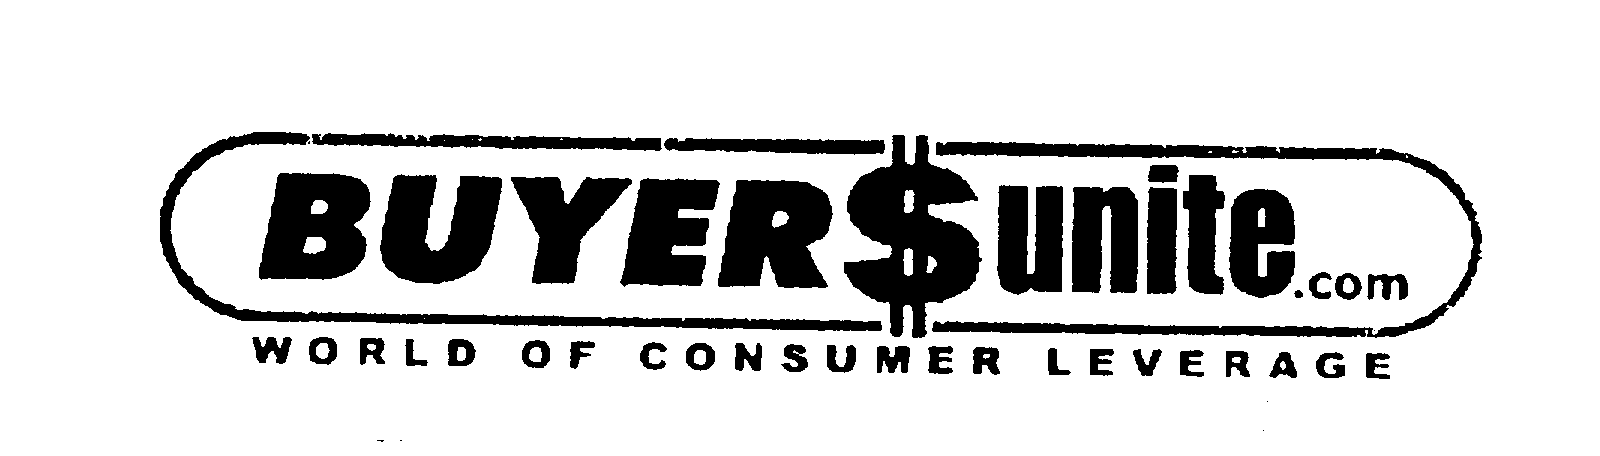  BUYER$UNITE.COM WORLD OF CONSUMER LEVERAGE UNITING BUYERS OF SIMILAR GOODS AND SERVICES